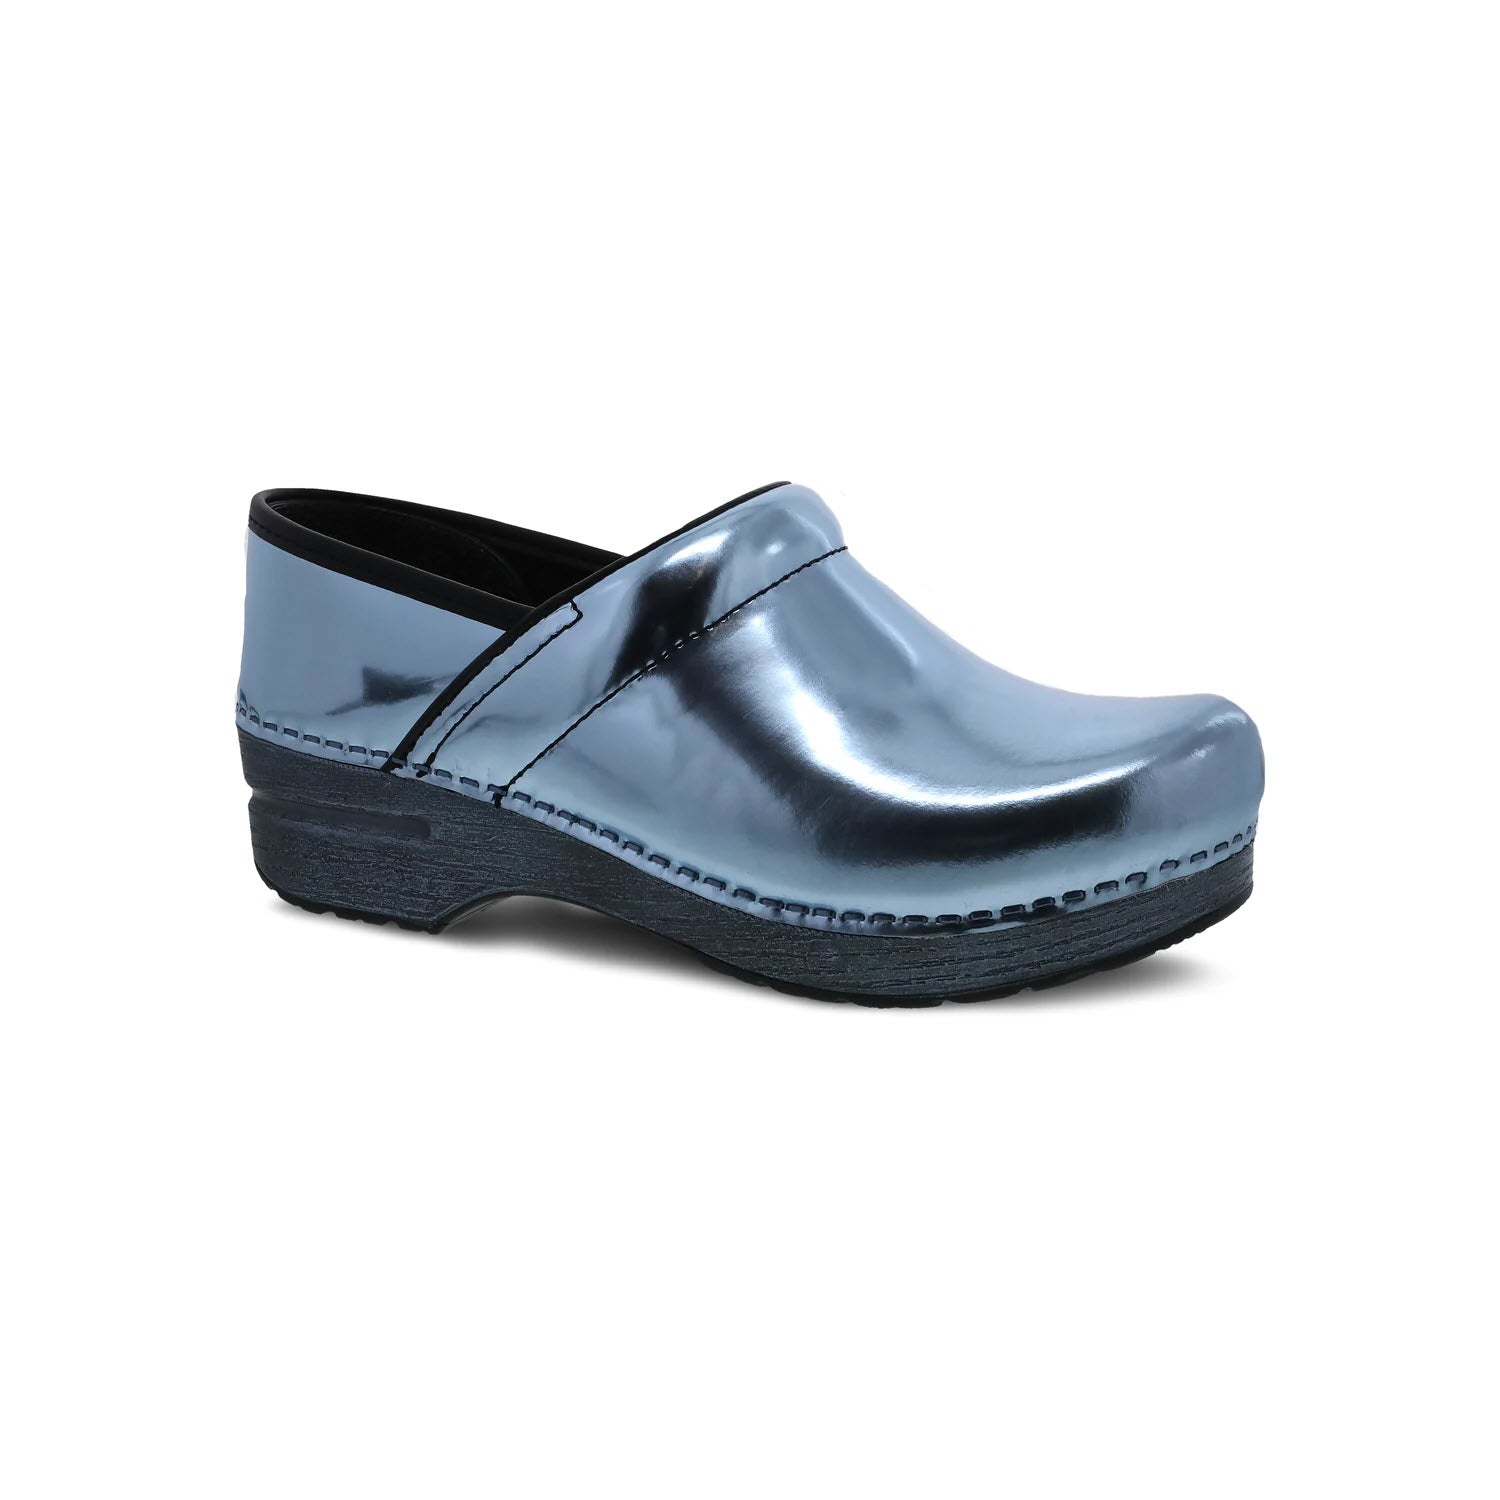 A shiny navy blue Dansko Professional Sky Chrome Metallic clog with a black strap and a textured sole on a white background.